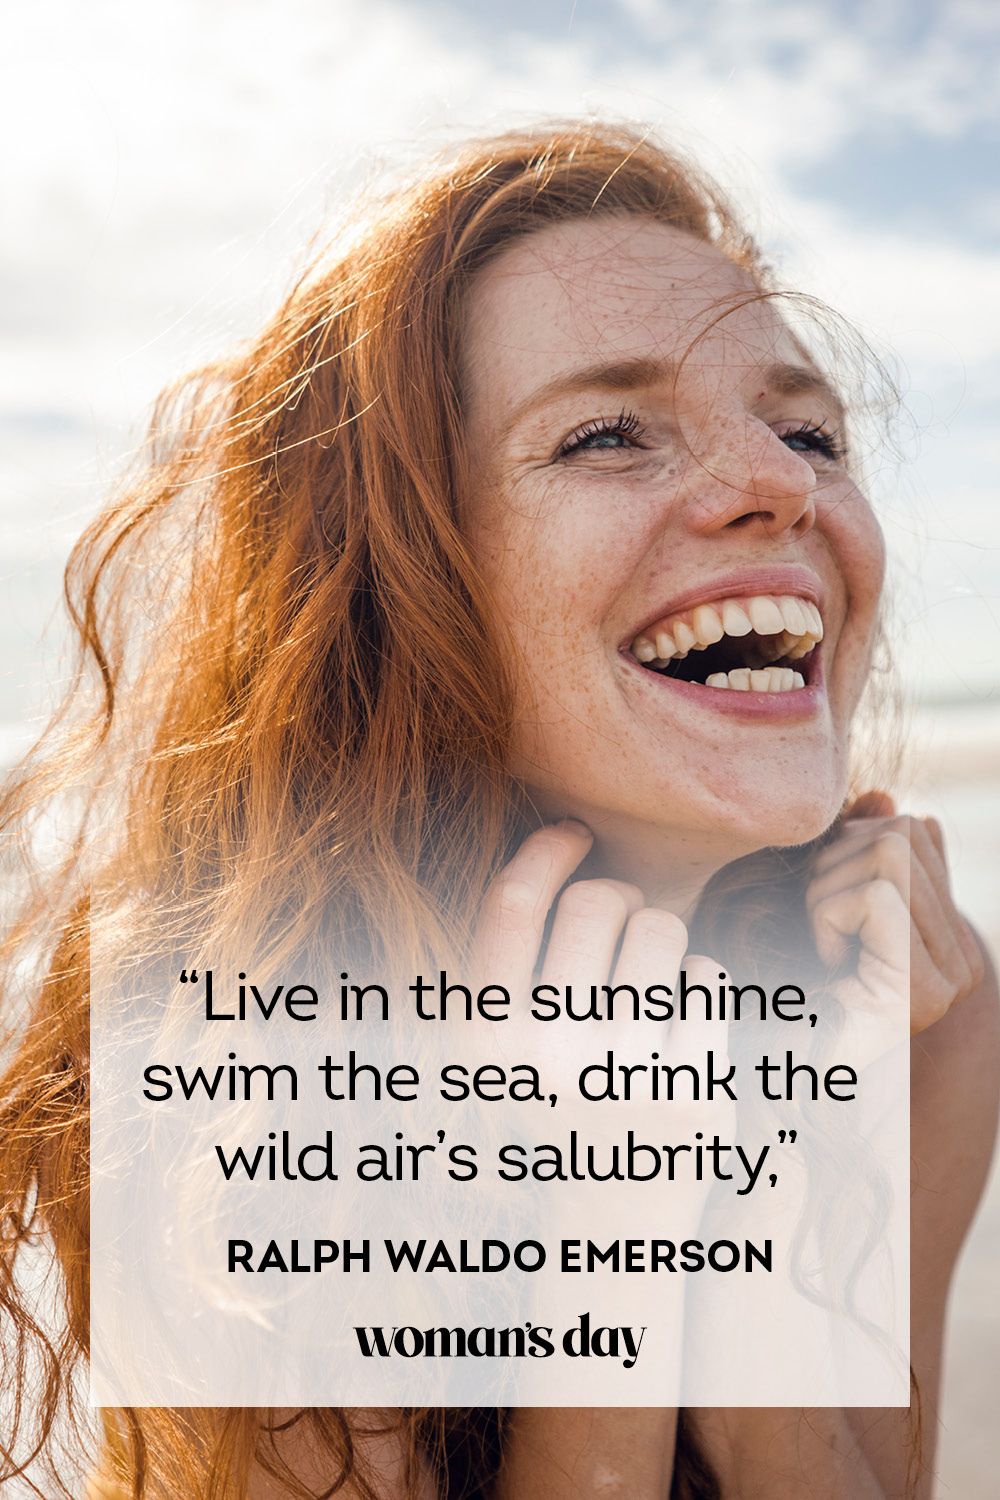 32 Best Summer Quotes - Happy Sayings & Quotes About Summertime